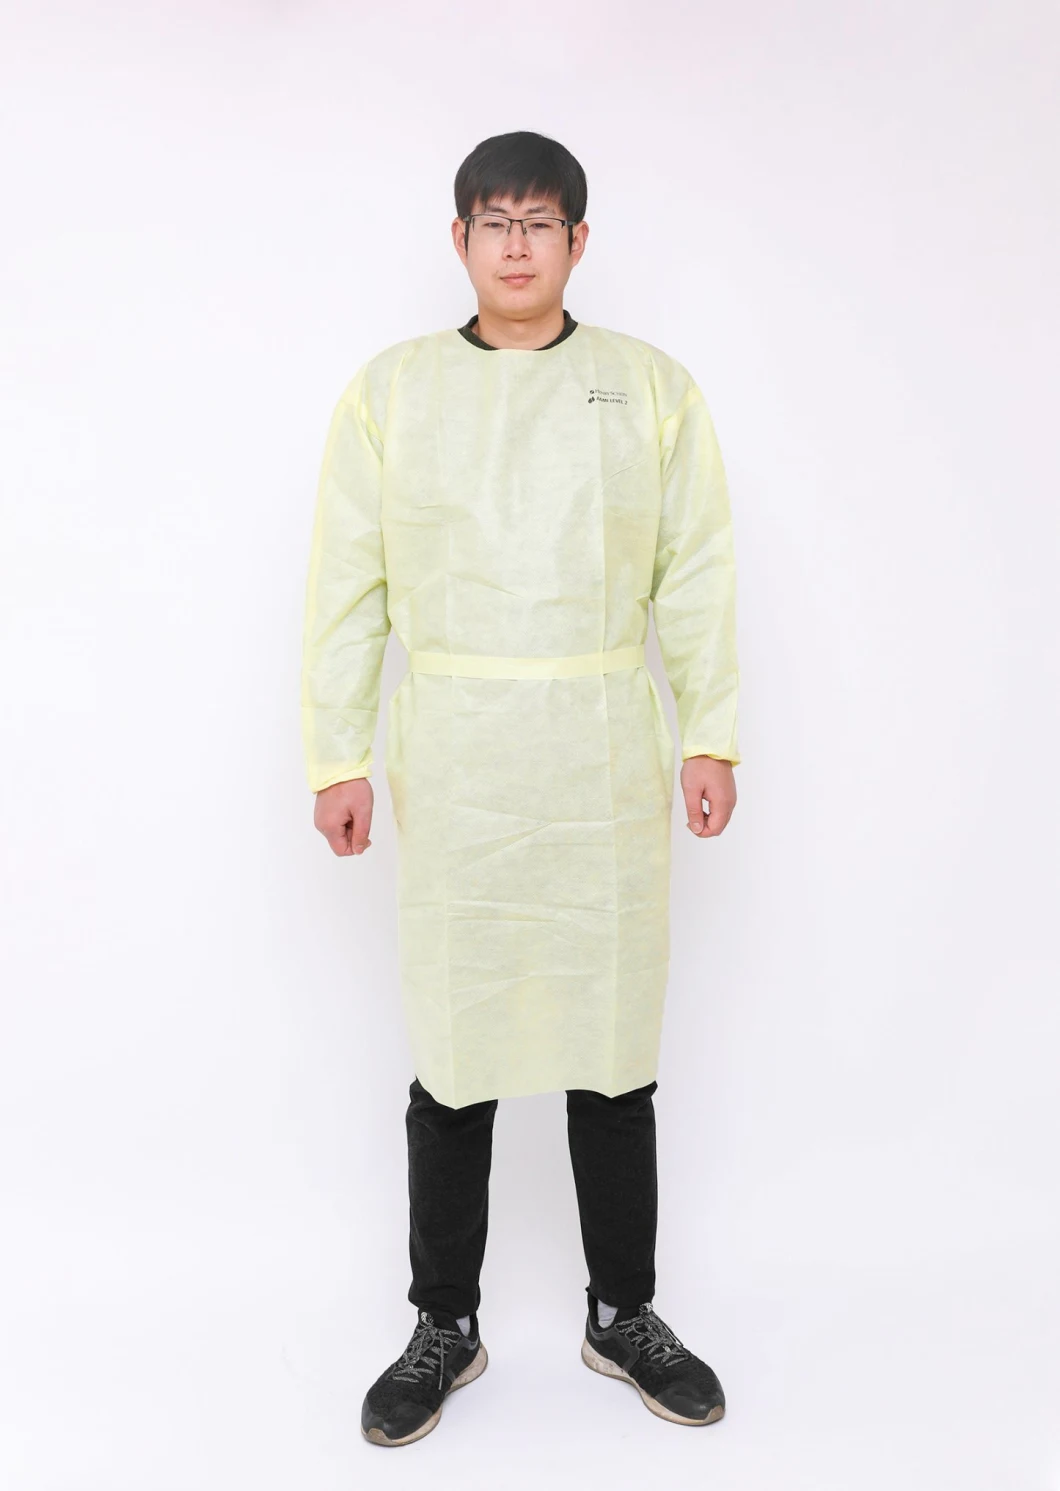 Disposable Protective Non-Woven One-Piece Hooded Dust-Proof Overalls One Piece for Hospital